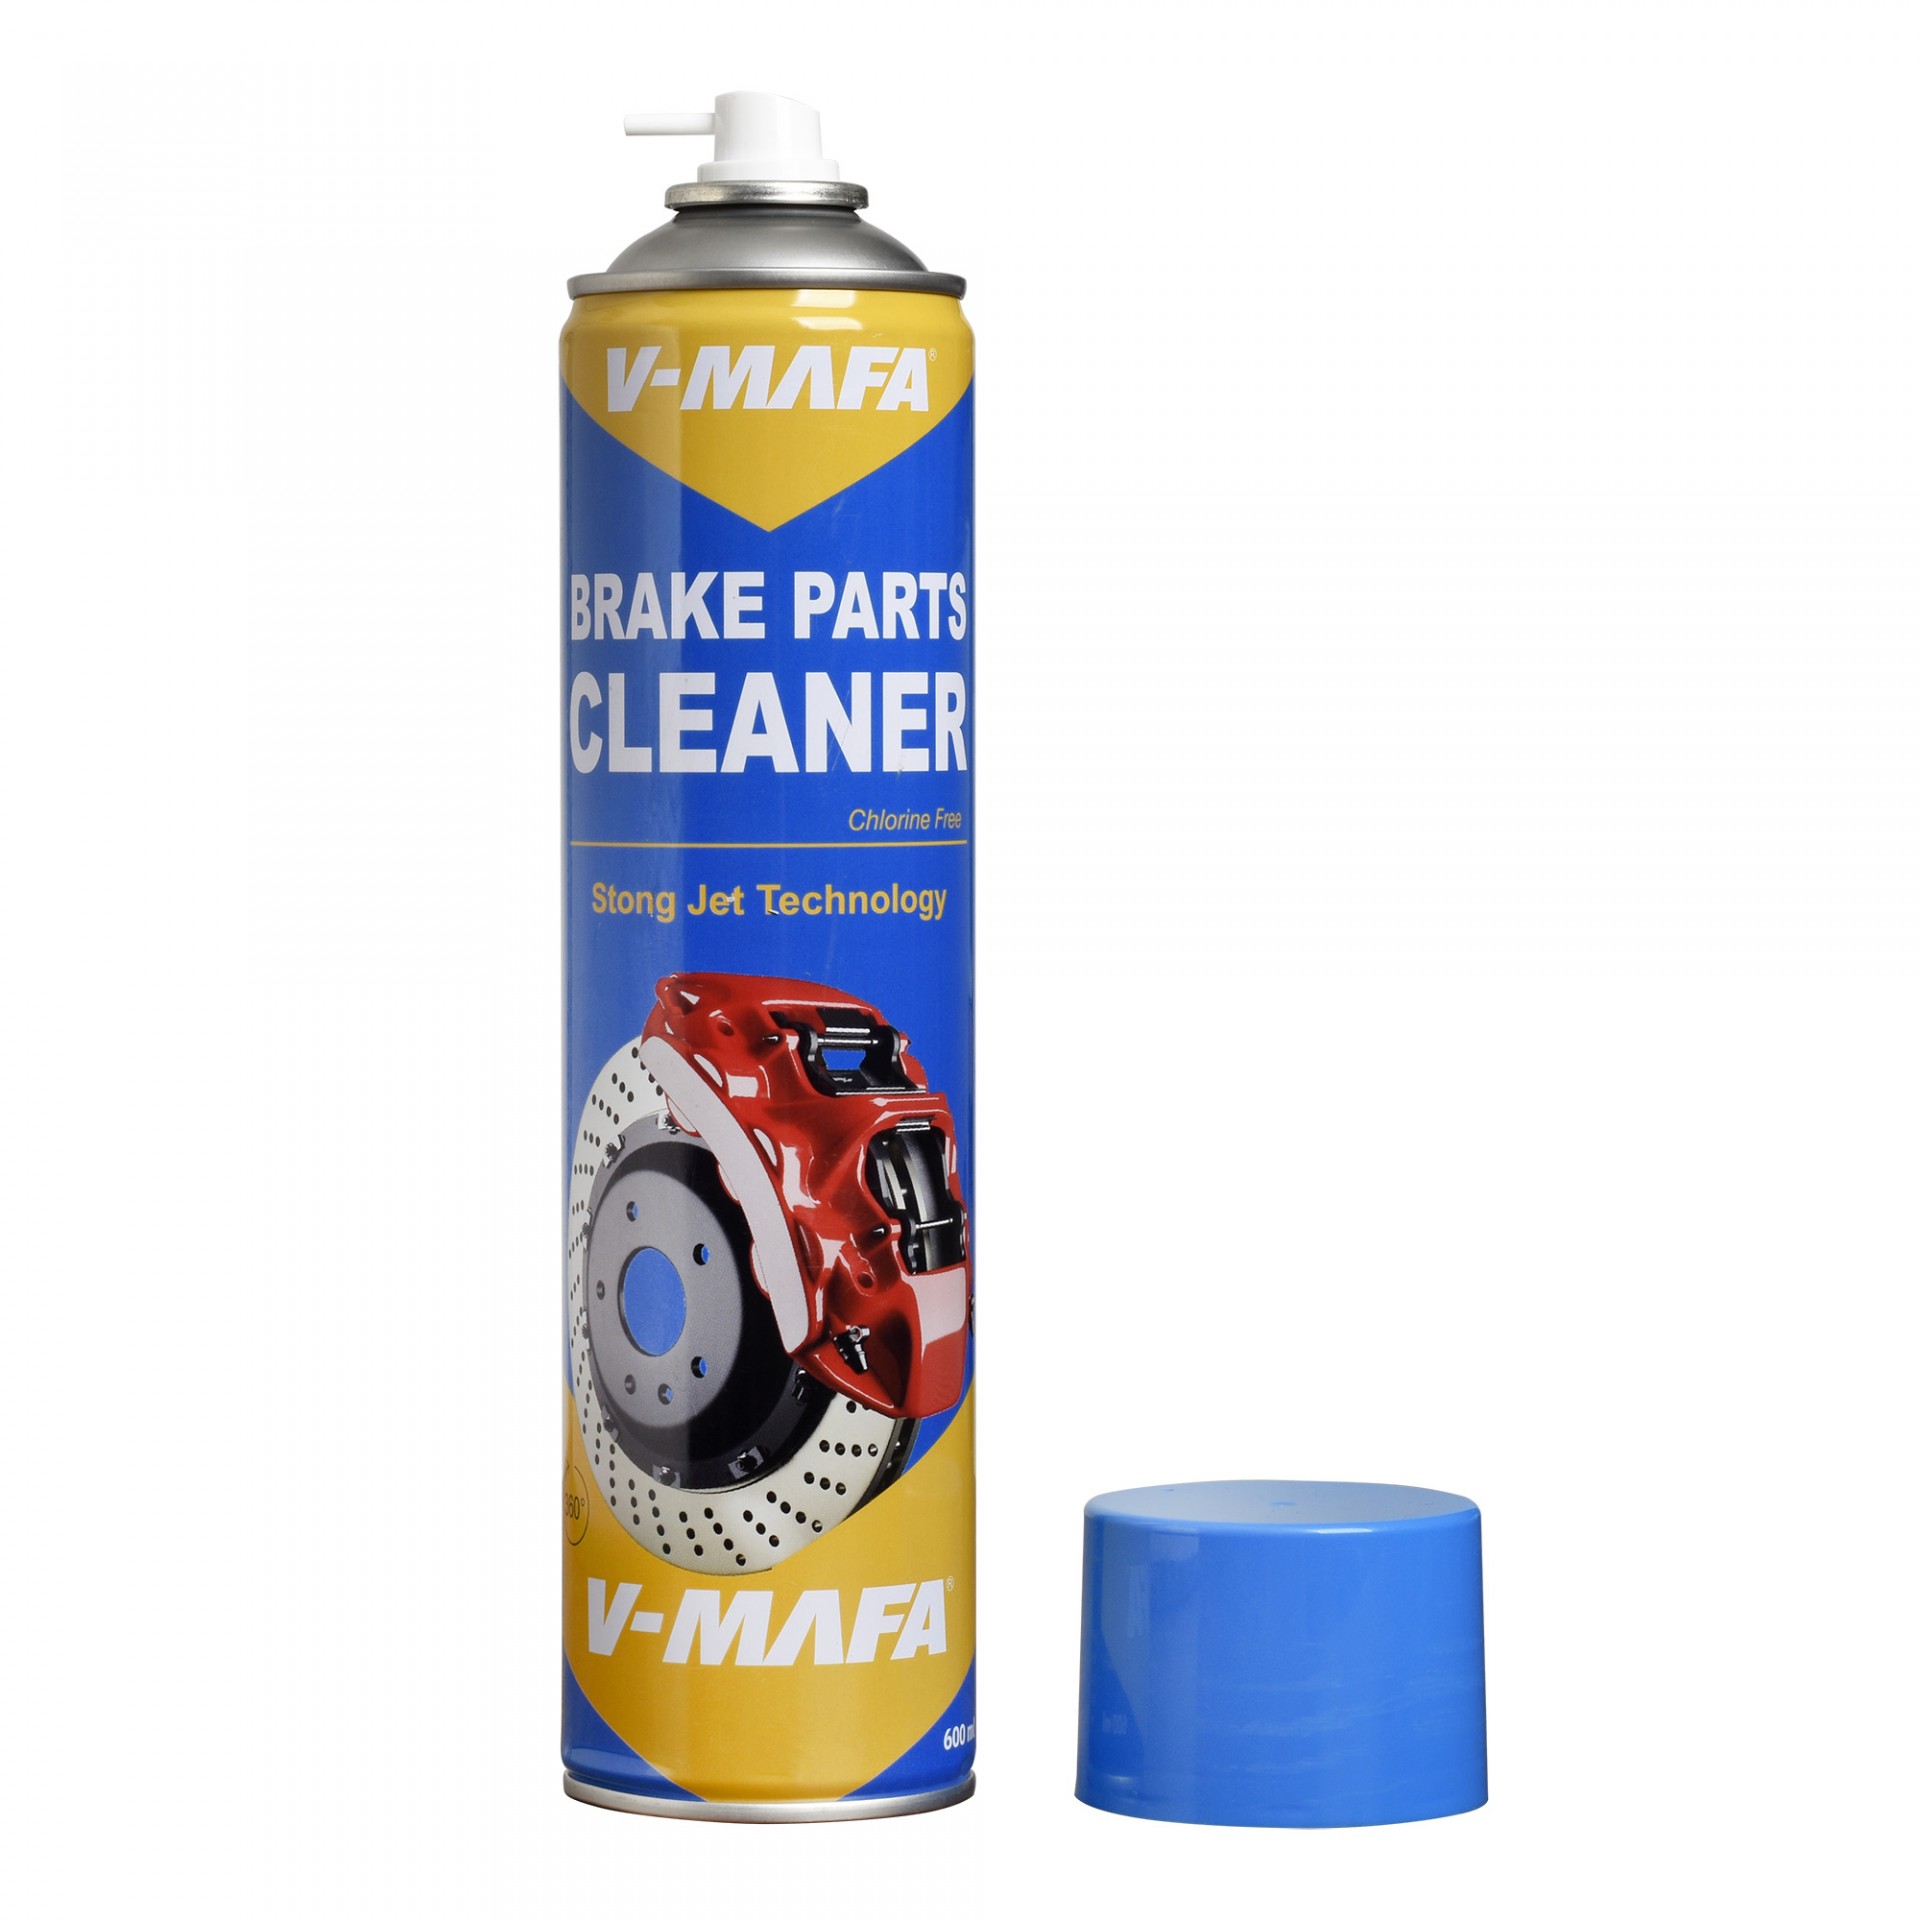 Strong Jet Technology Brake Parts Cleaner1